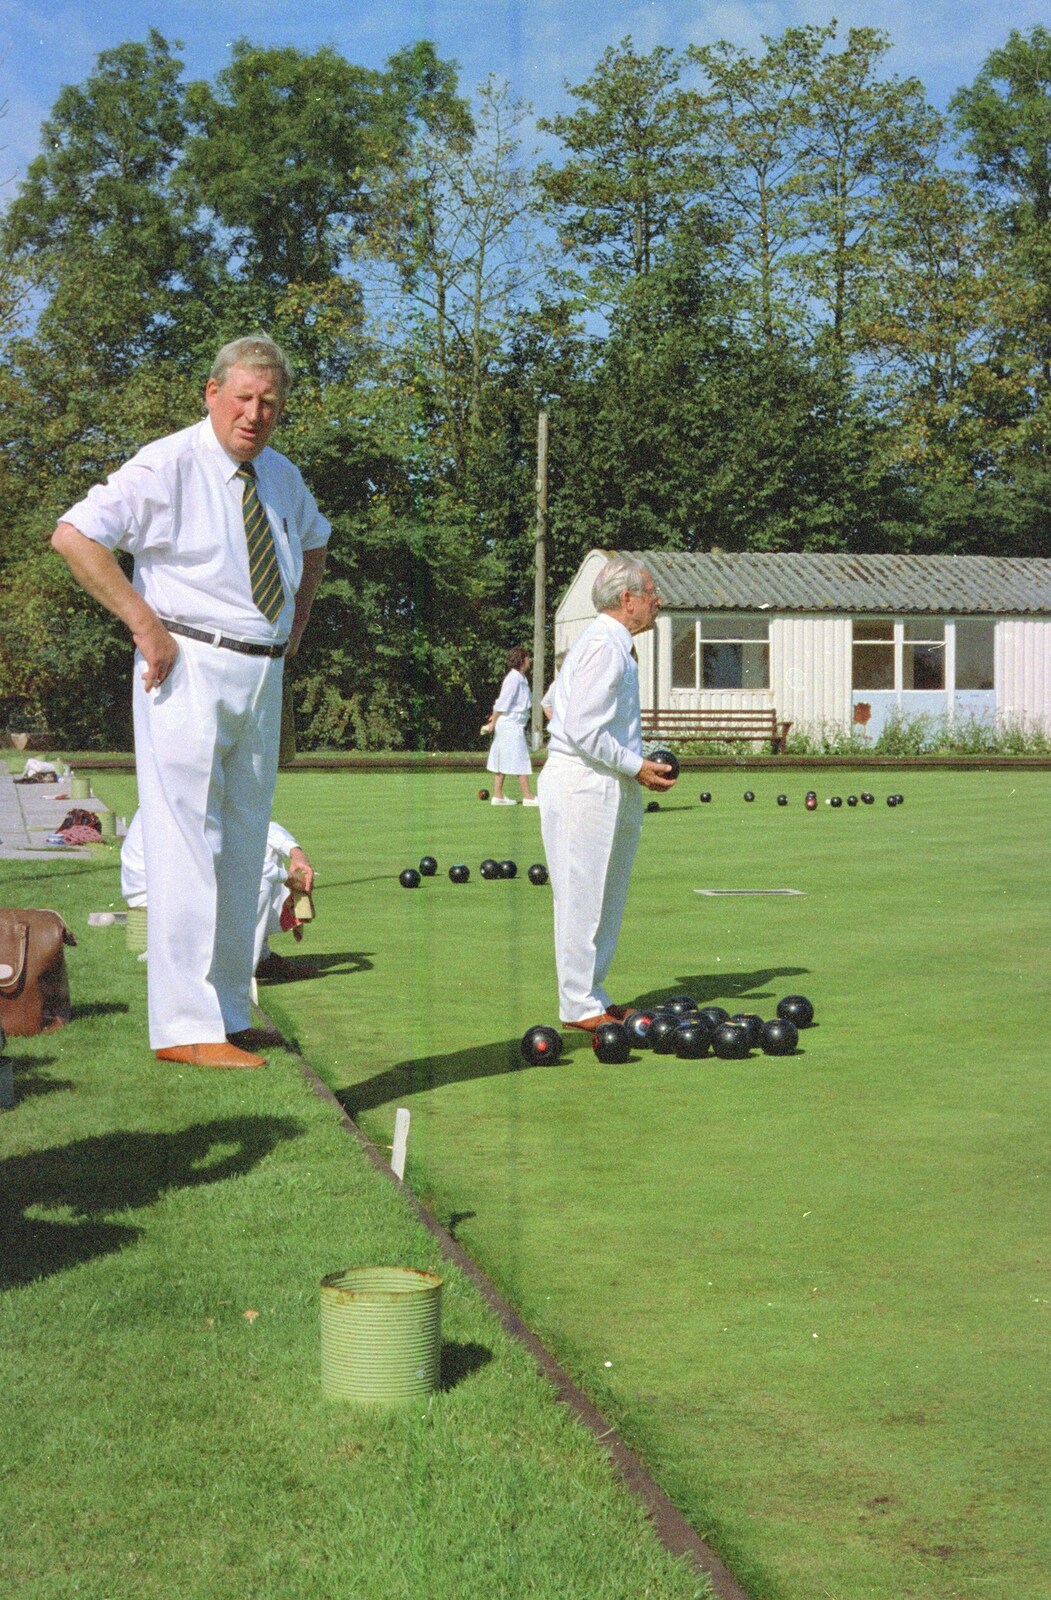 Tony inspects the bowling action from Cider Making With Geoff and Brenda, Stuston, Suffolk - 10th September 1998